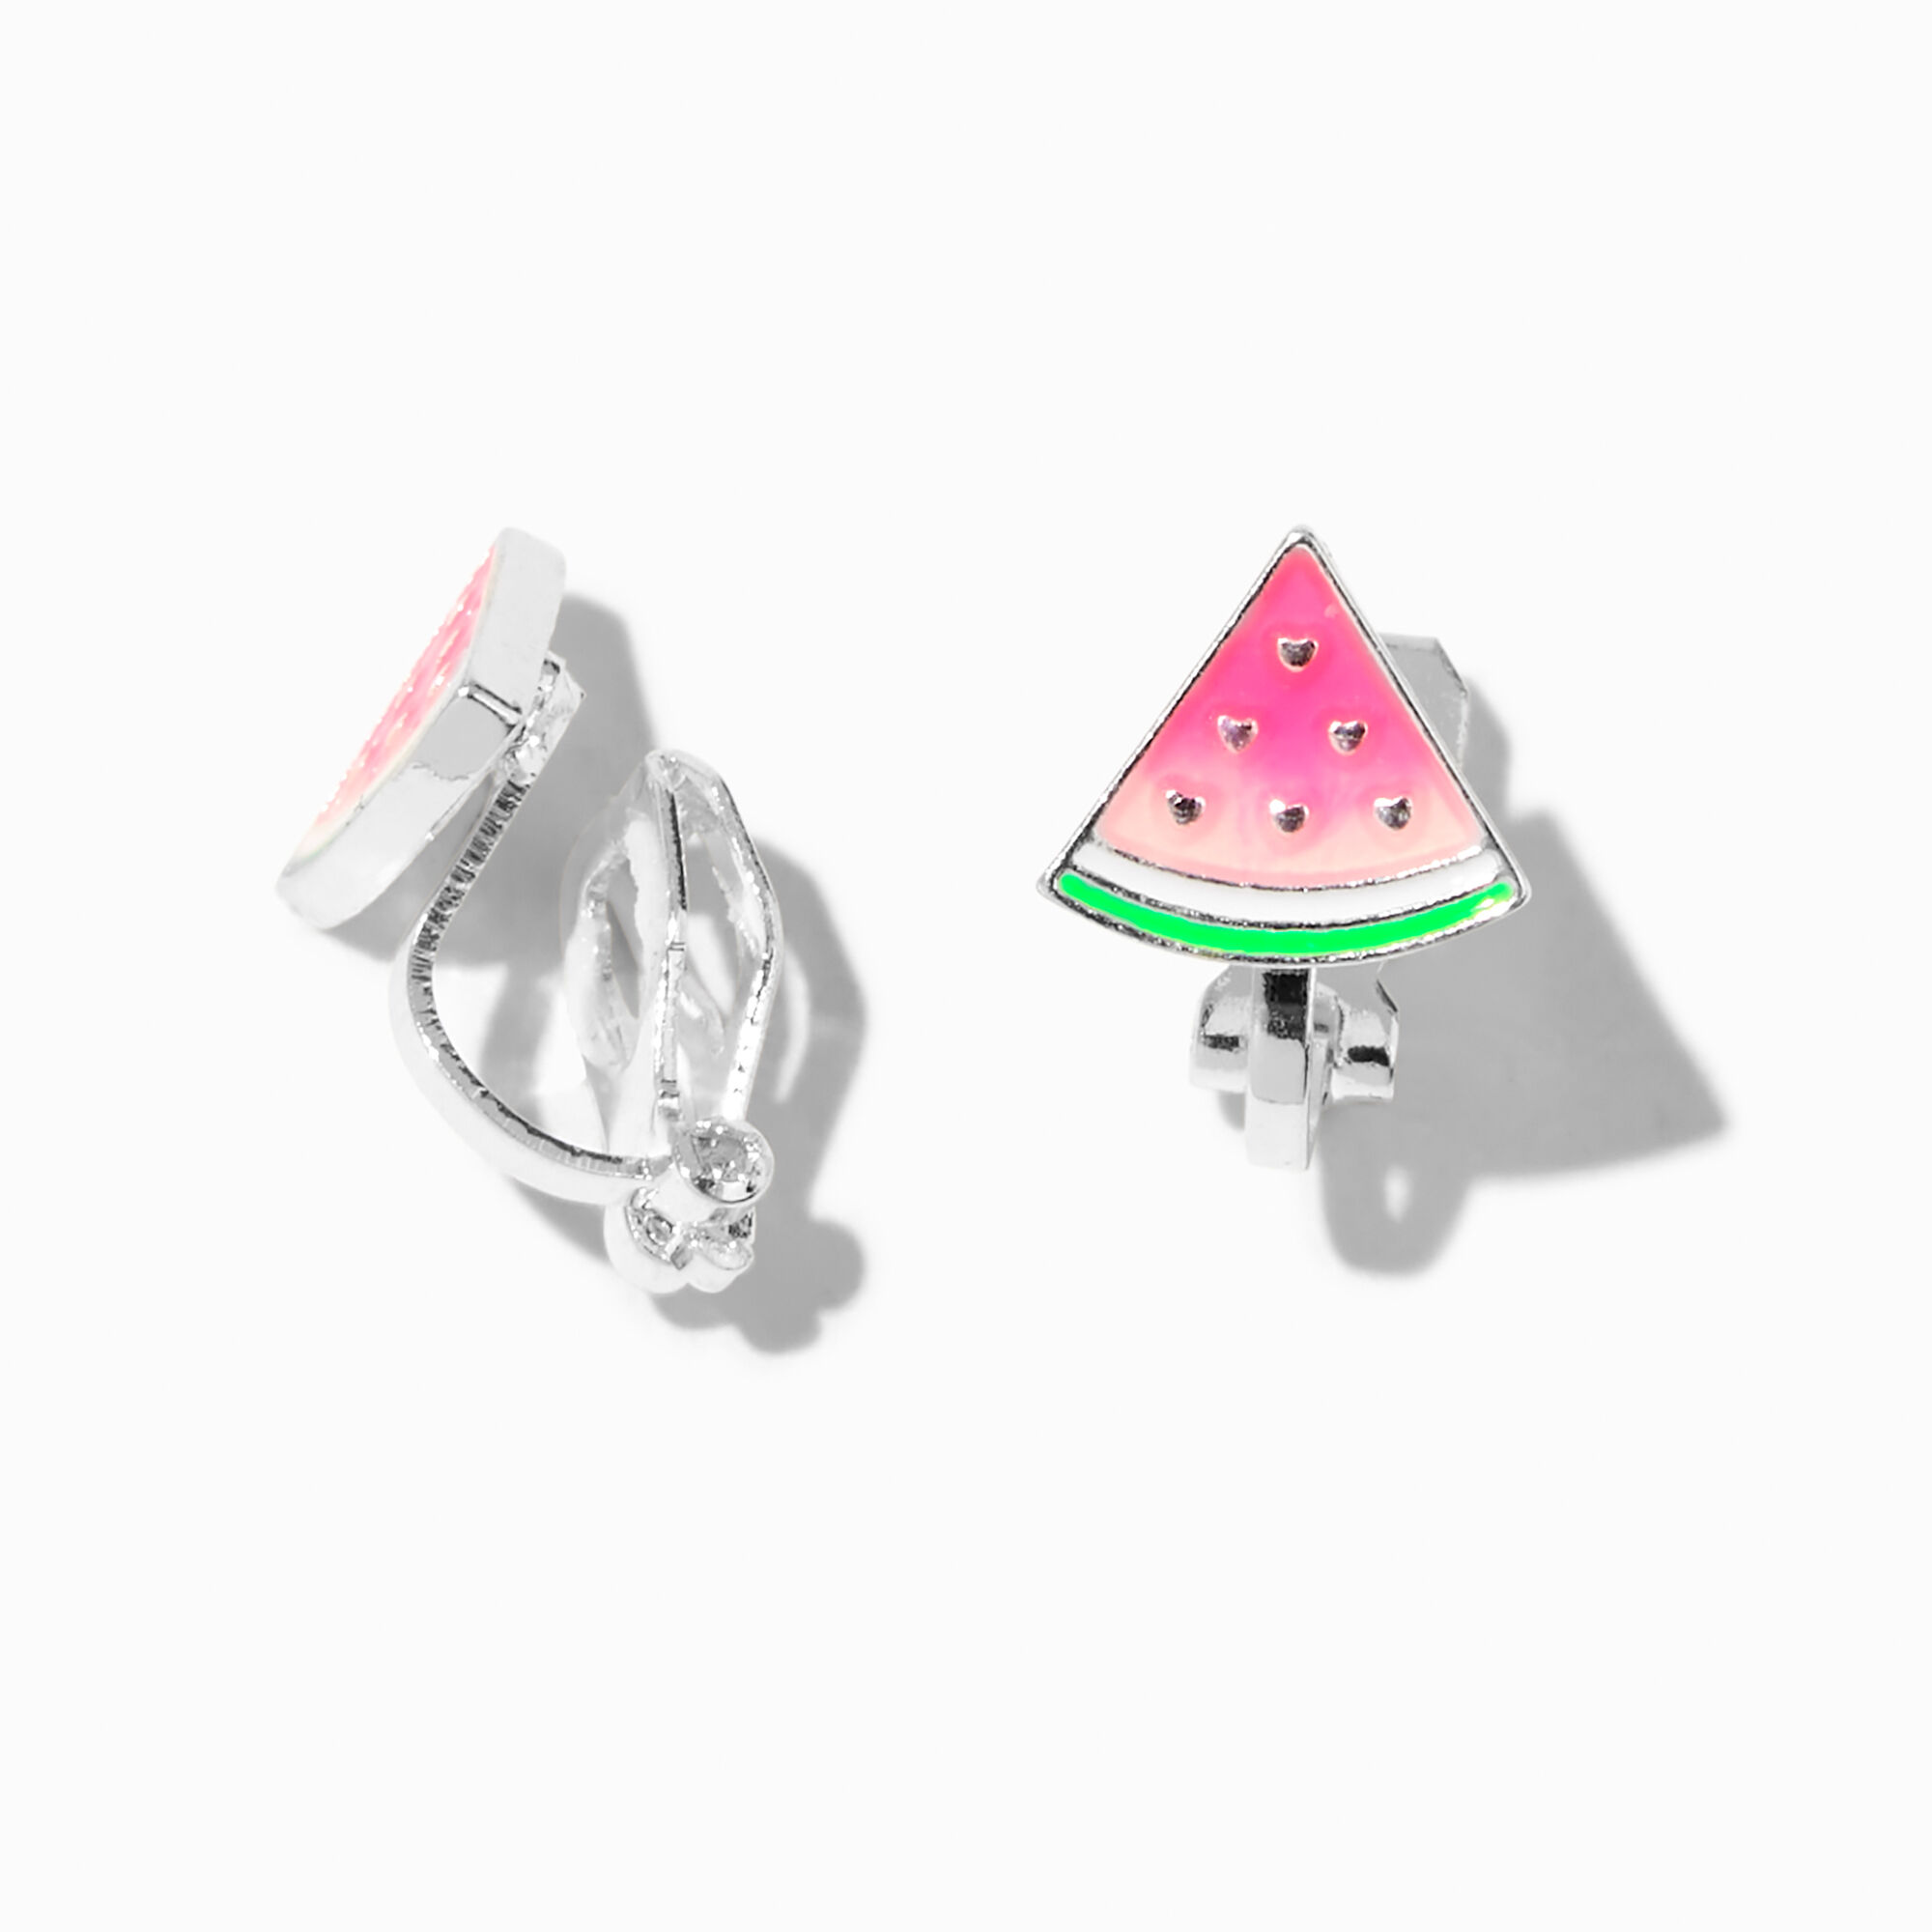 View Claires Uv ColorChanging Watermelon ClipOn Earrings Pink information